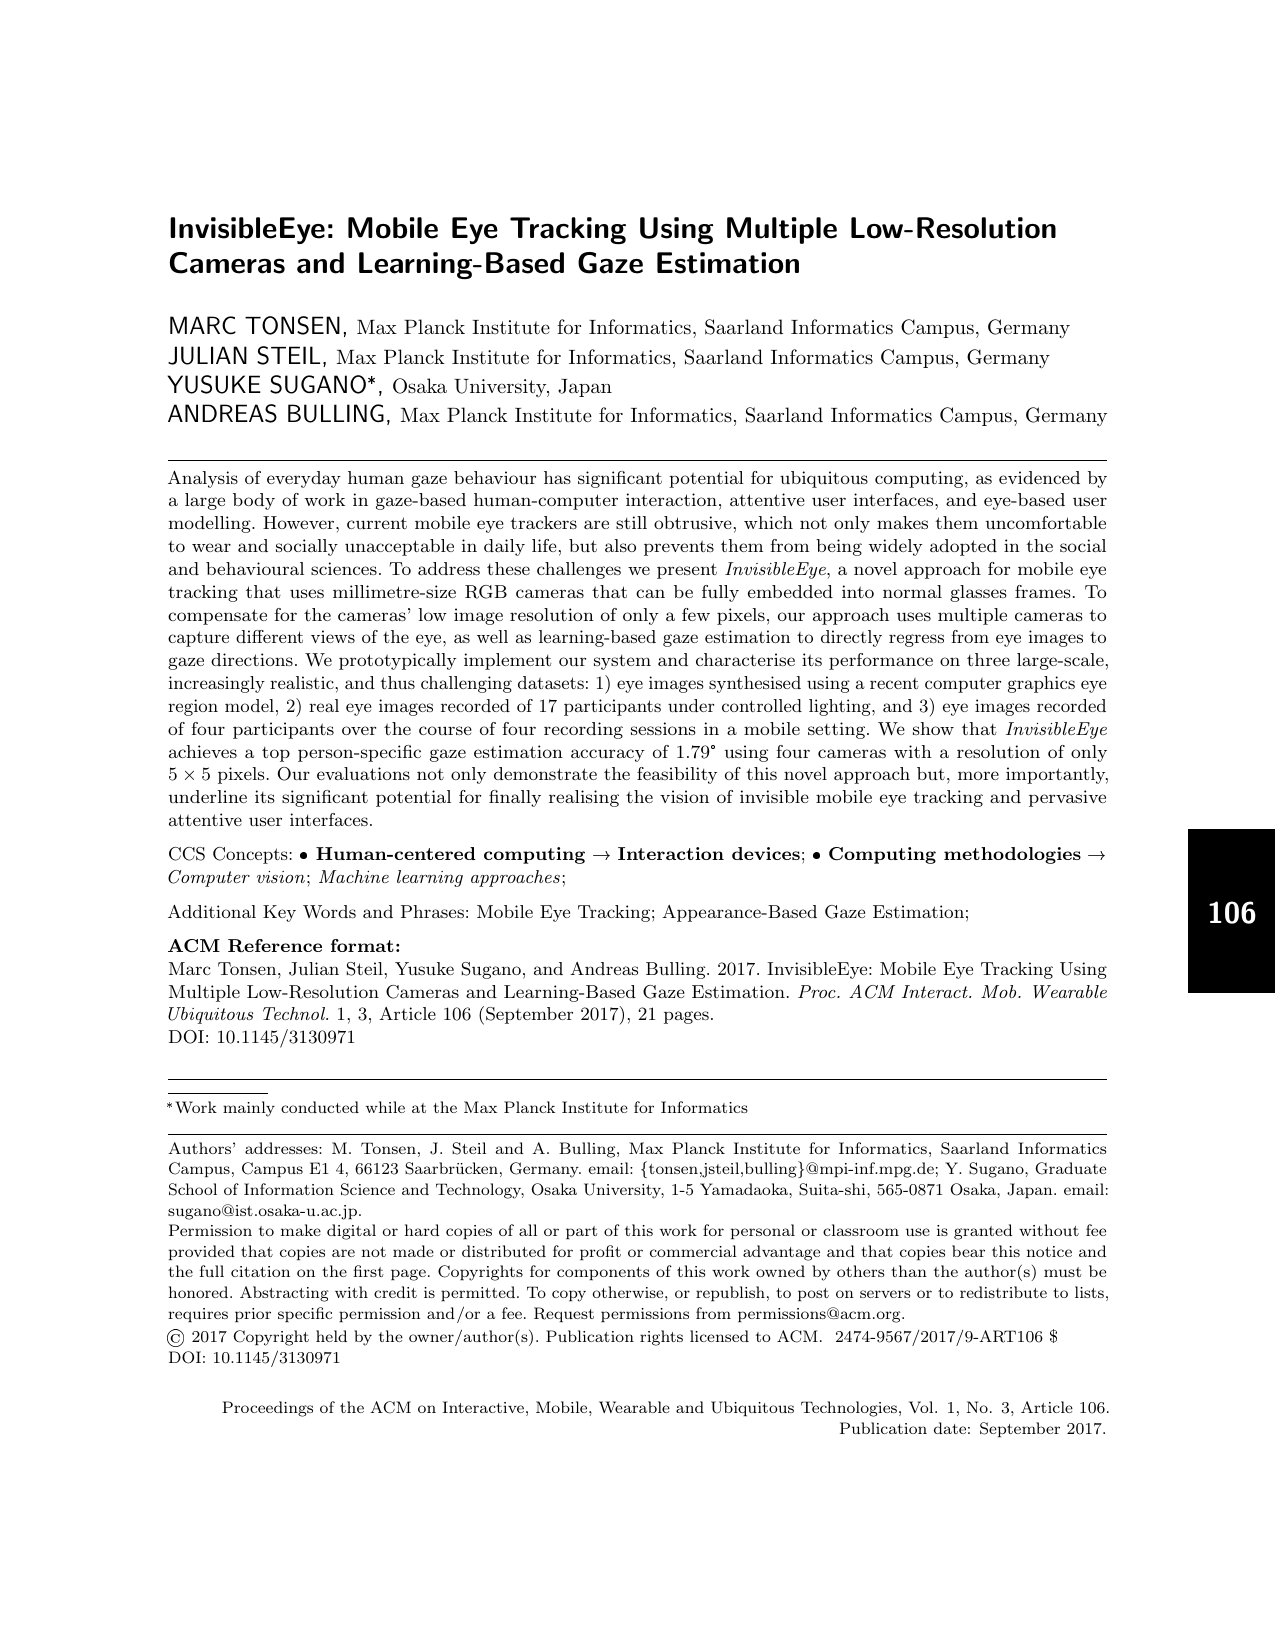 InvisibleEye: Mobile Eye Tracking Using Multiple Low-Resolution Cameras and Learning-Based Gaze Estimation